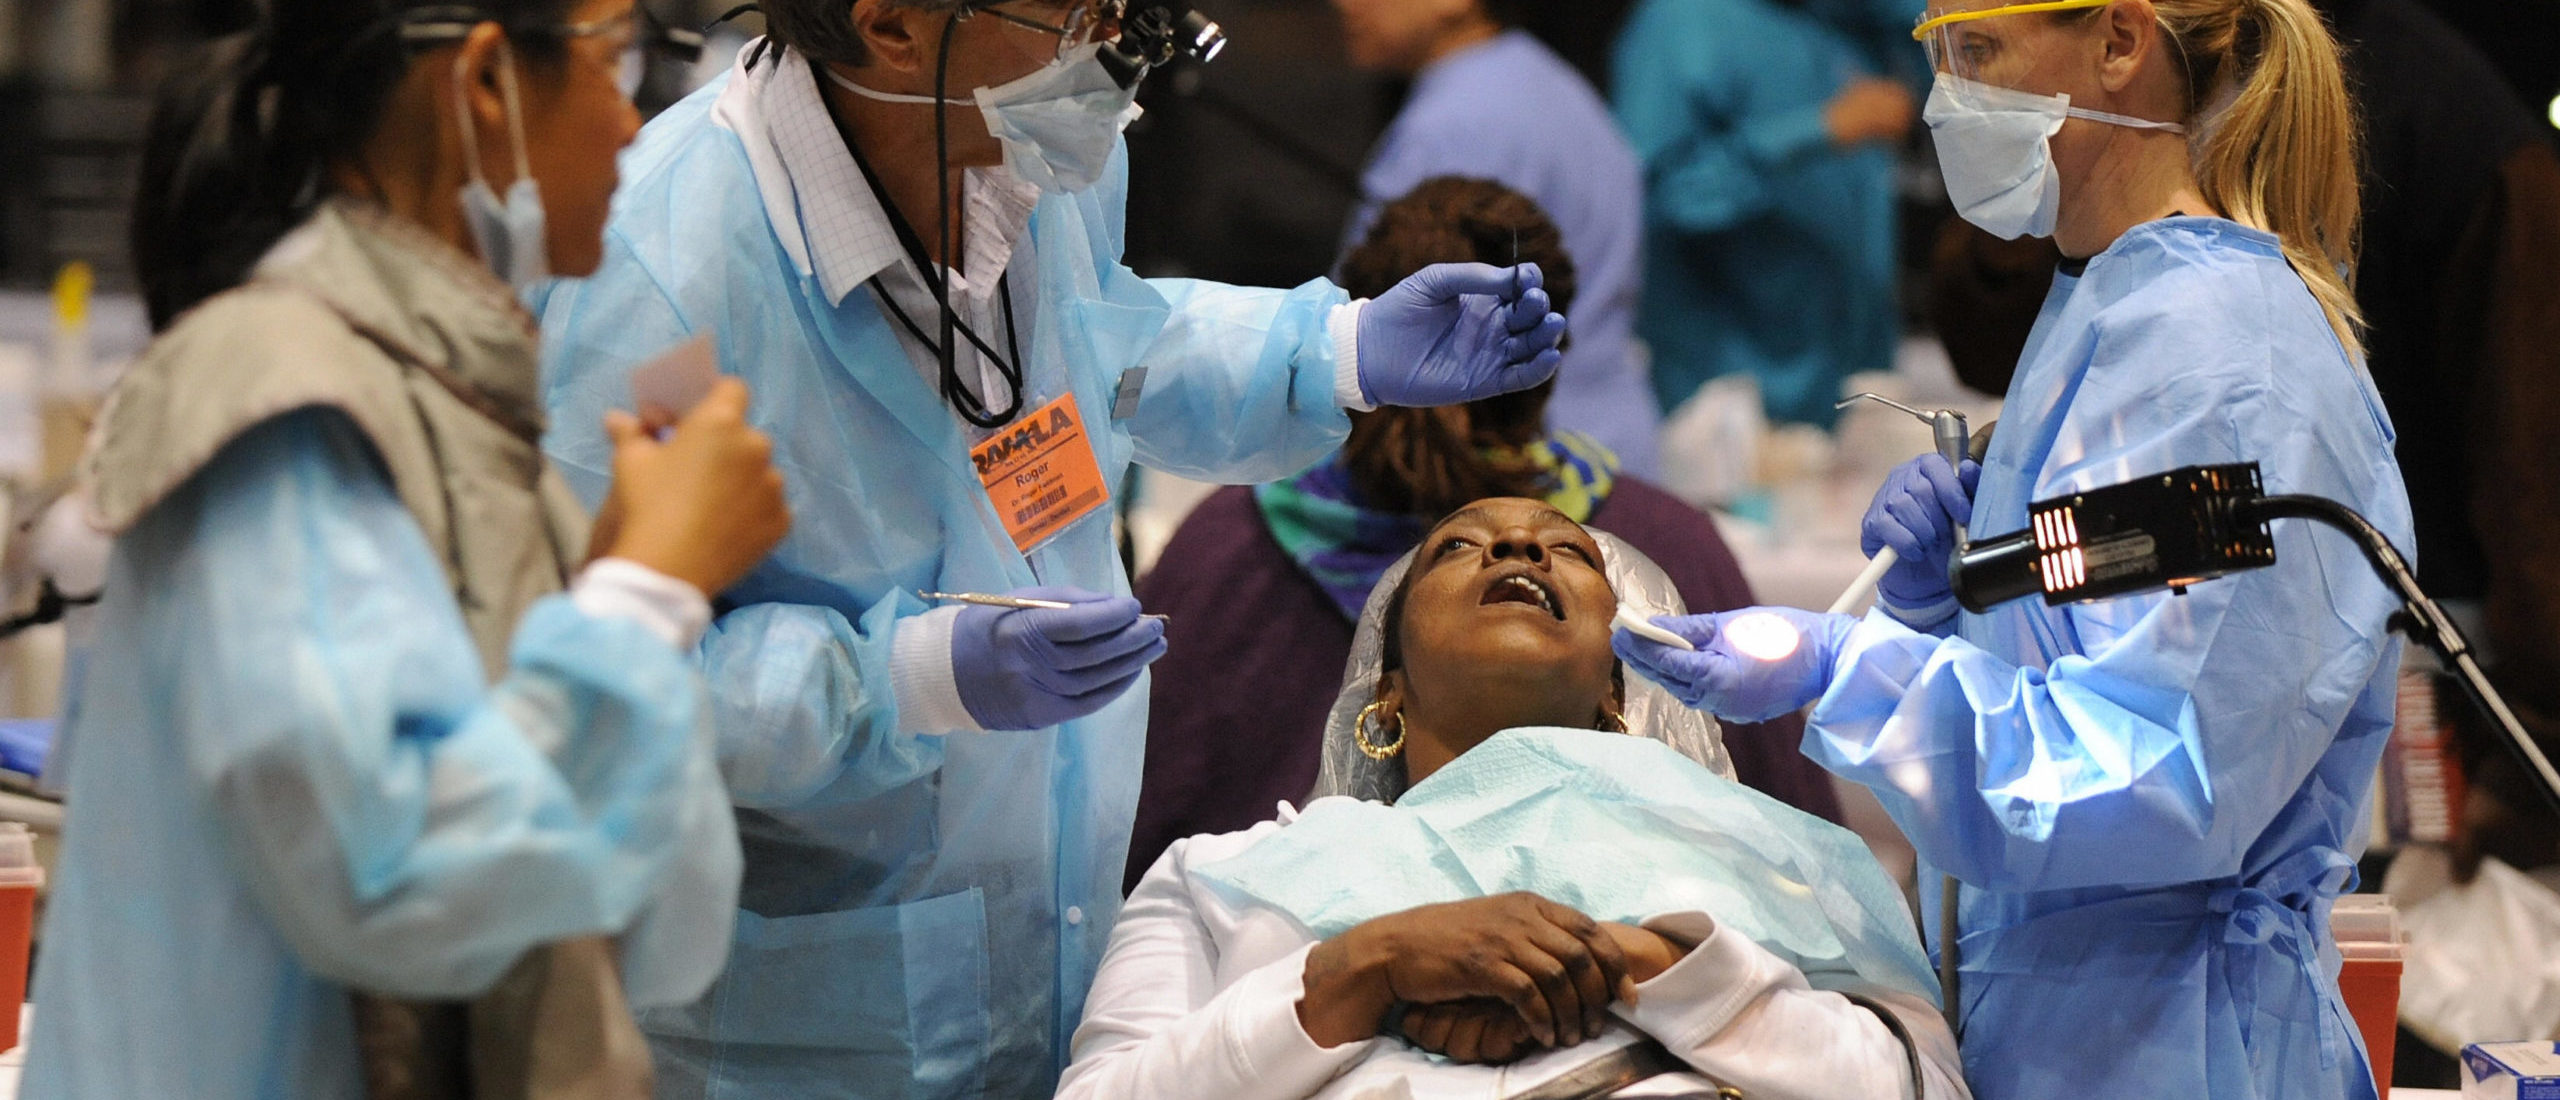 Volunteer medical staff offer free dental services to those without health insurance in Los Angeles. (Mark Ralston/AFP via Getty Images)